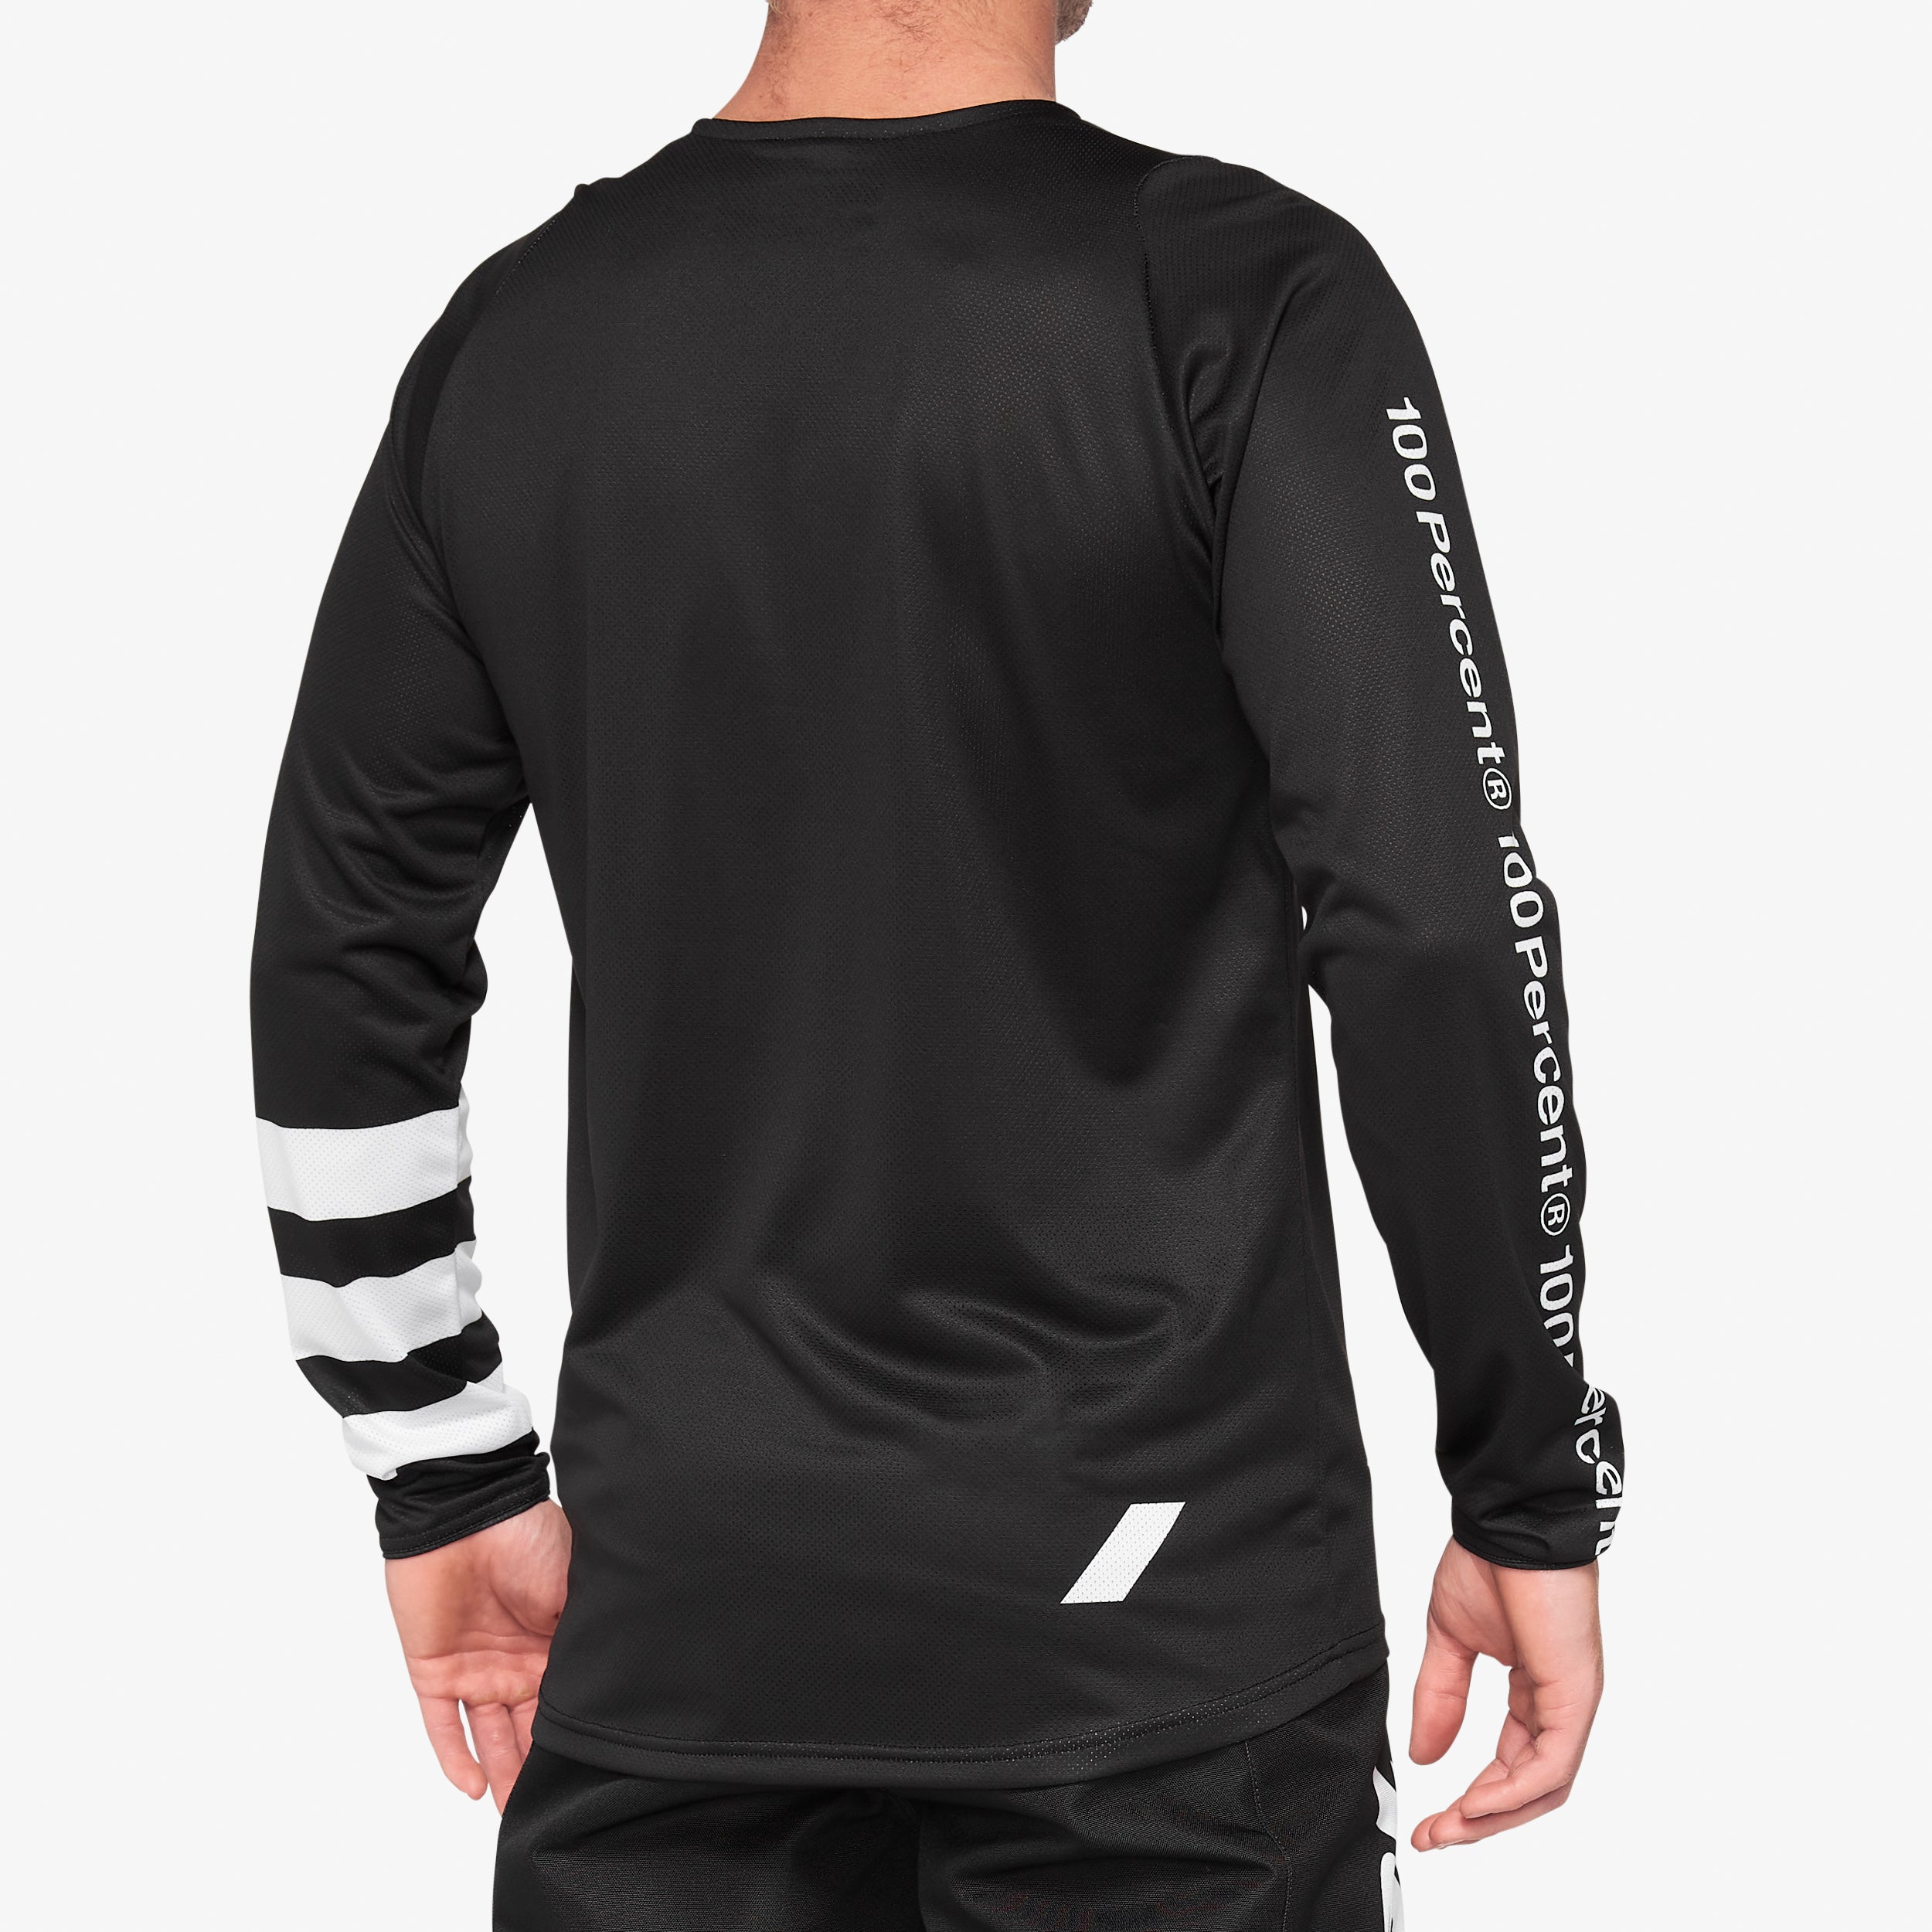 R-CORE Long Sleeve Jersey Black/White - Secondary